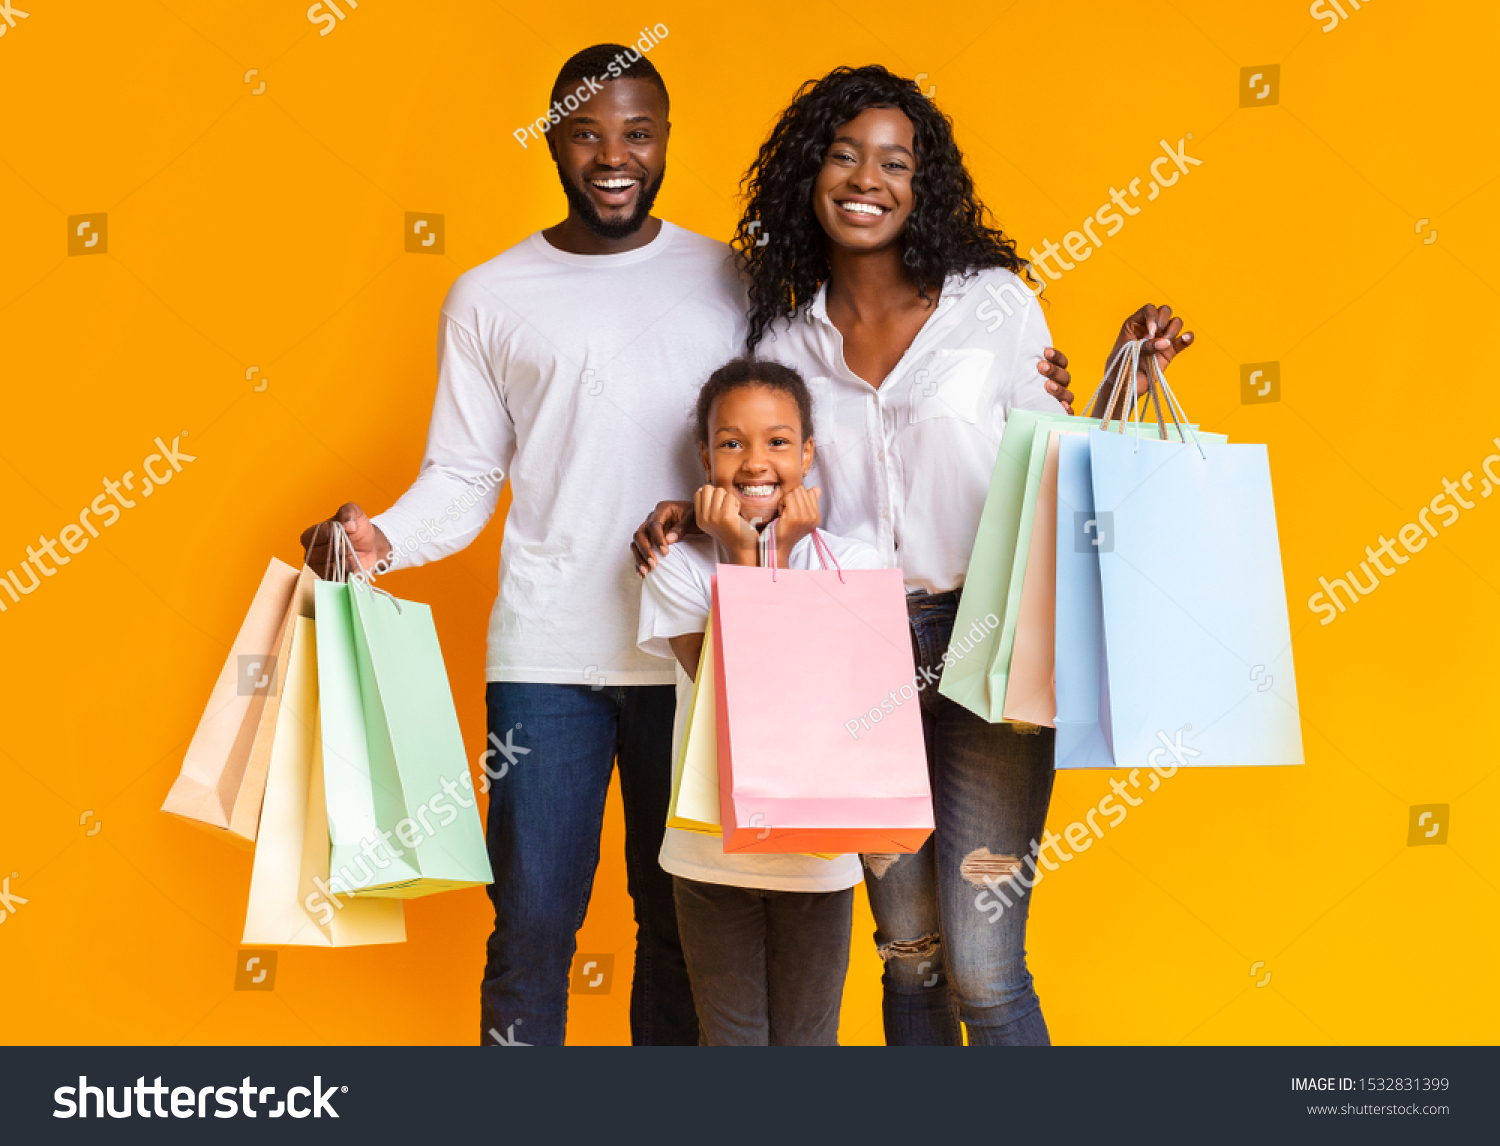 6,548 Family shopping african Images, Stock Photos & Vectors | Shutterstock